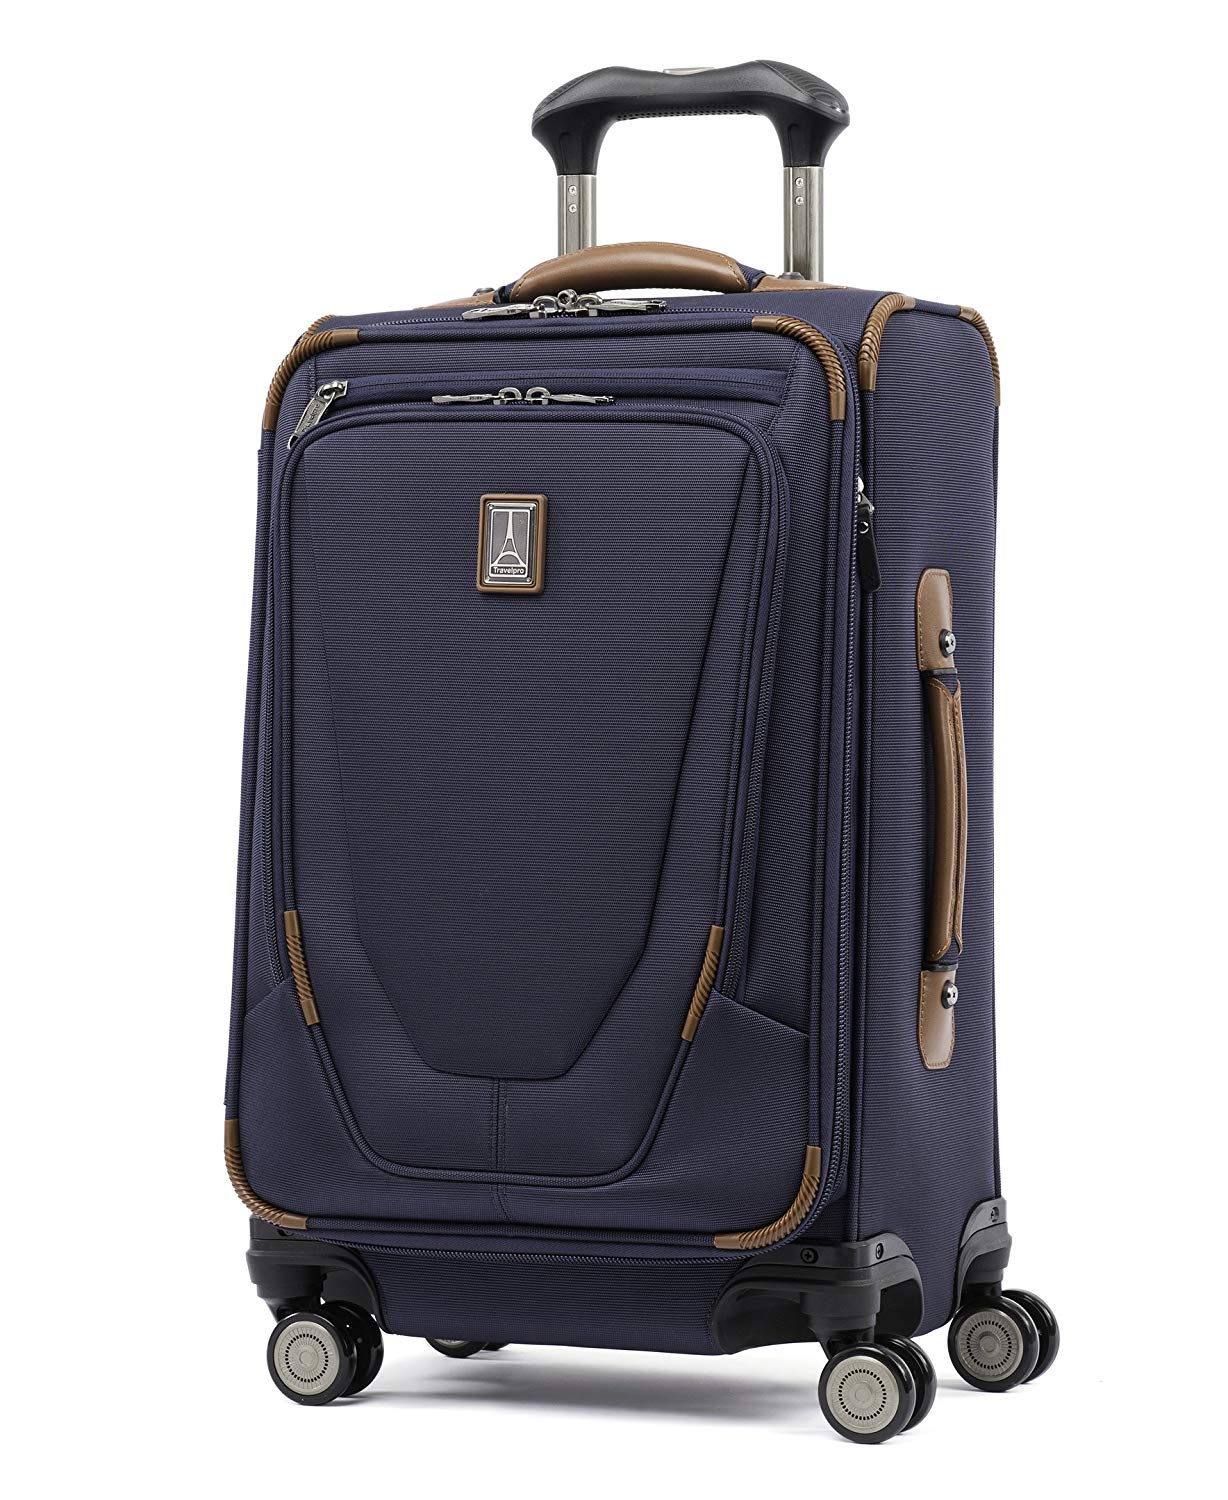 Travelpro Luggage Crew 11 21 Carry-on Expandable Spinner wSuiter and USB Port